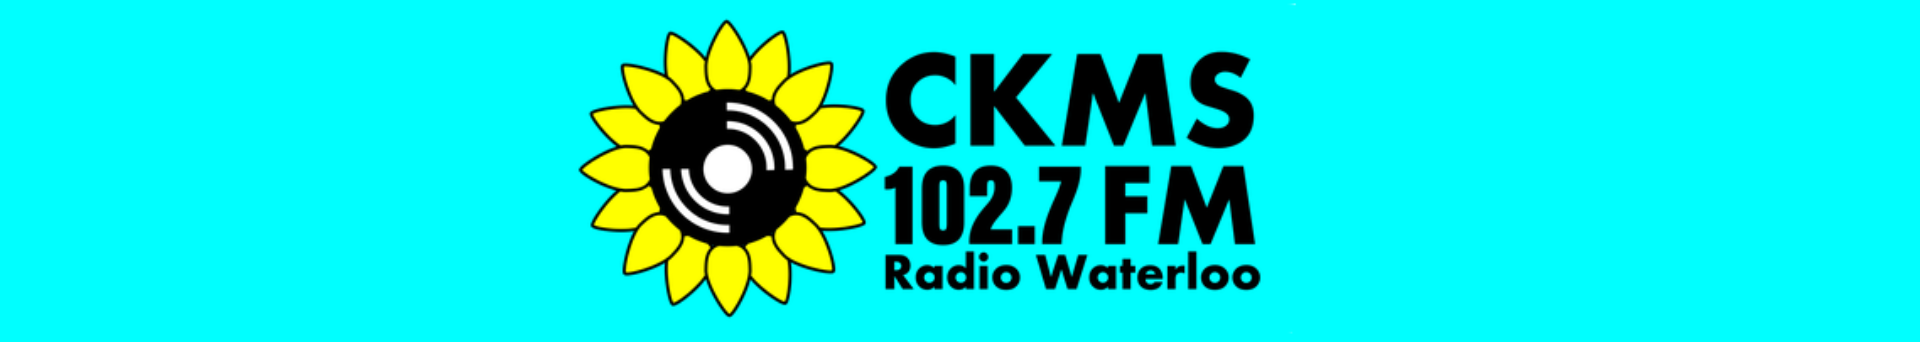 CKMS 102.7FM Radio Waterloo (sunflower logo and black text on a teal background)